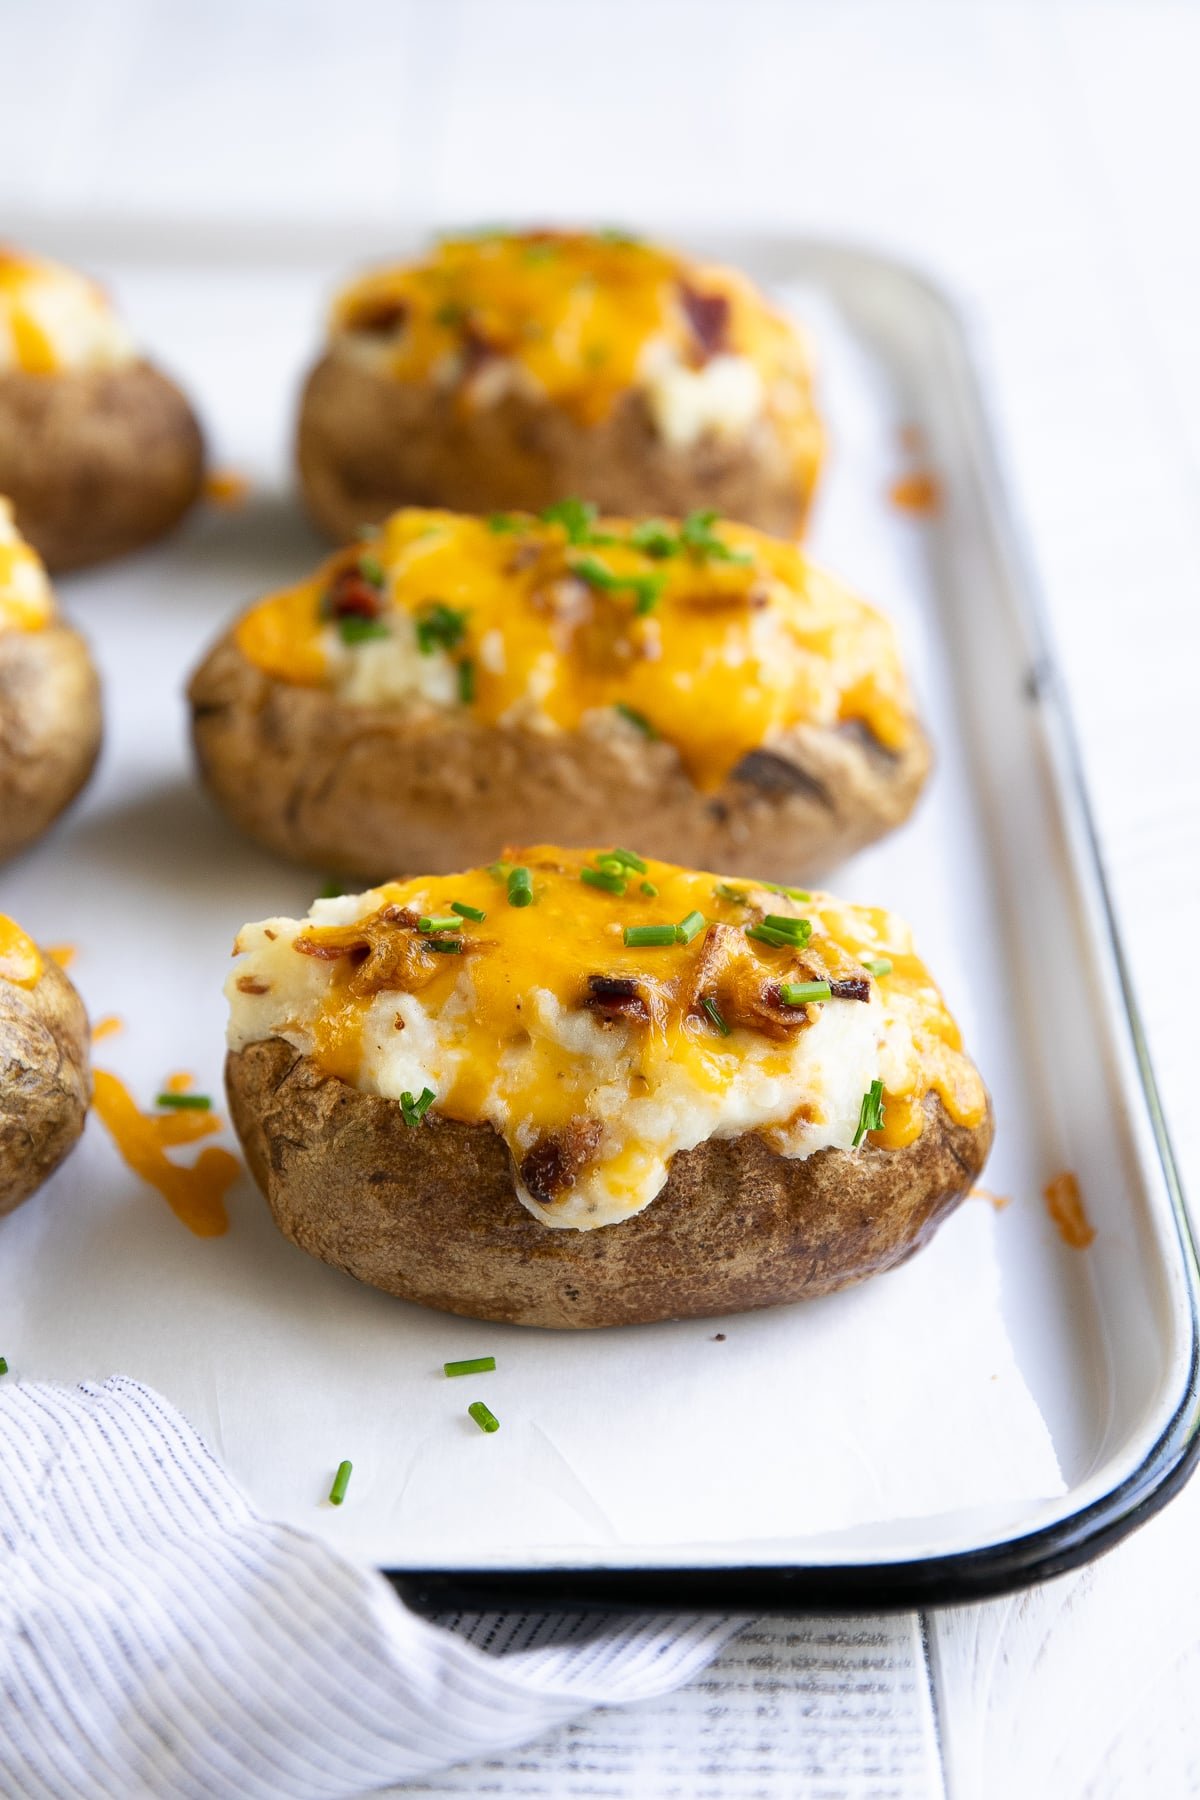 Twice baked potatoes topped with melted cheddar cheese, bacon bits, and fresh chives.